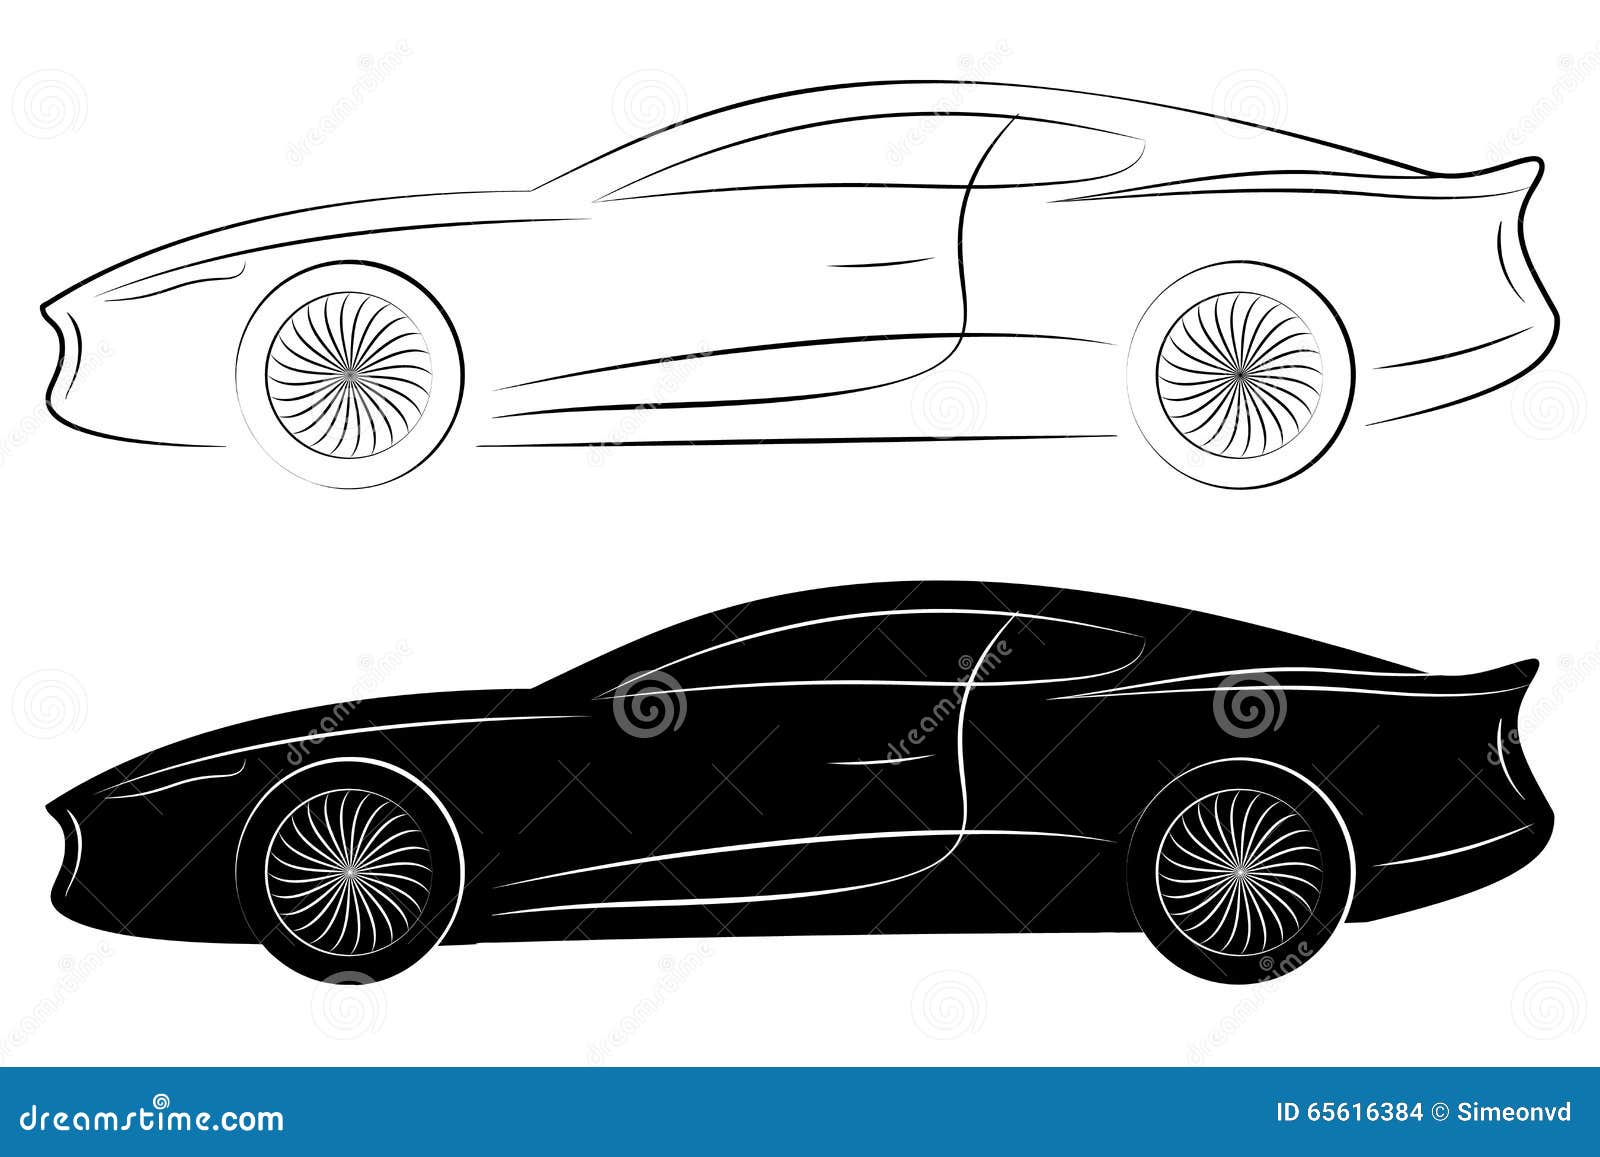 outlines of sports cars